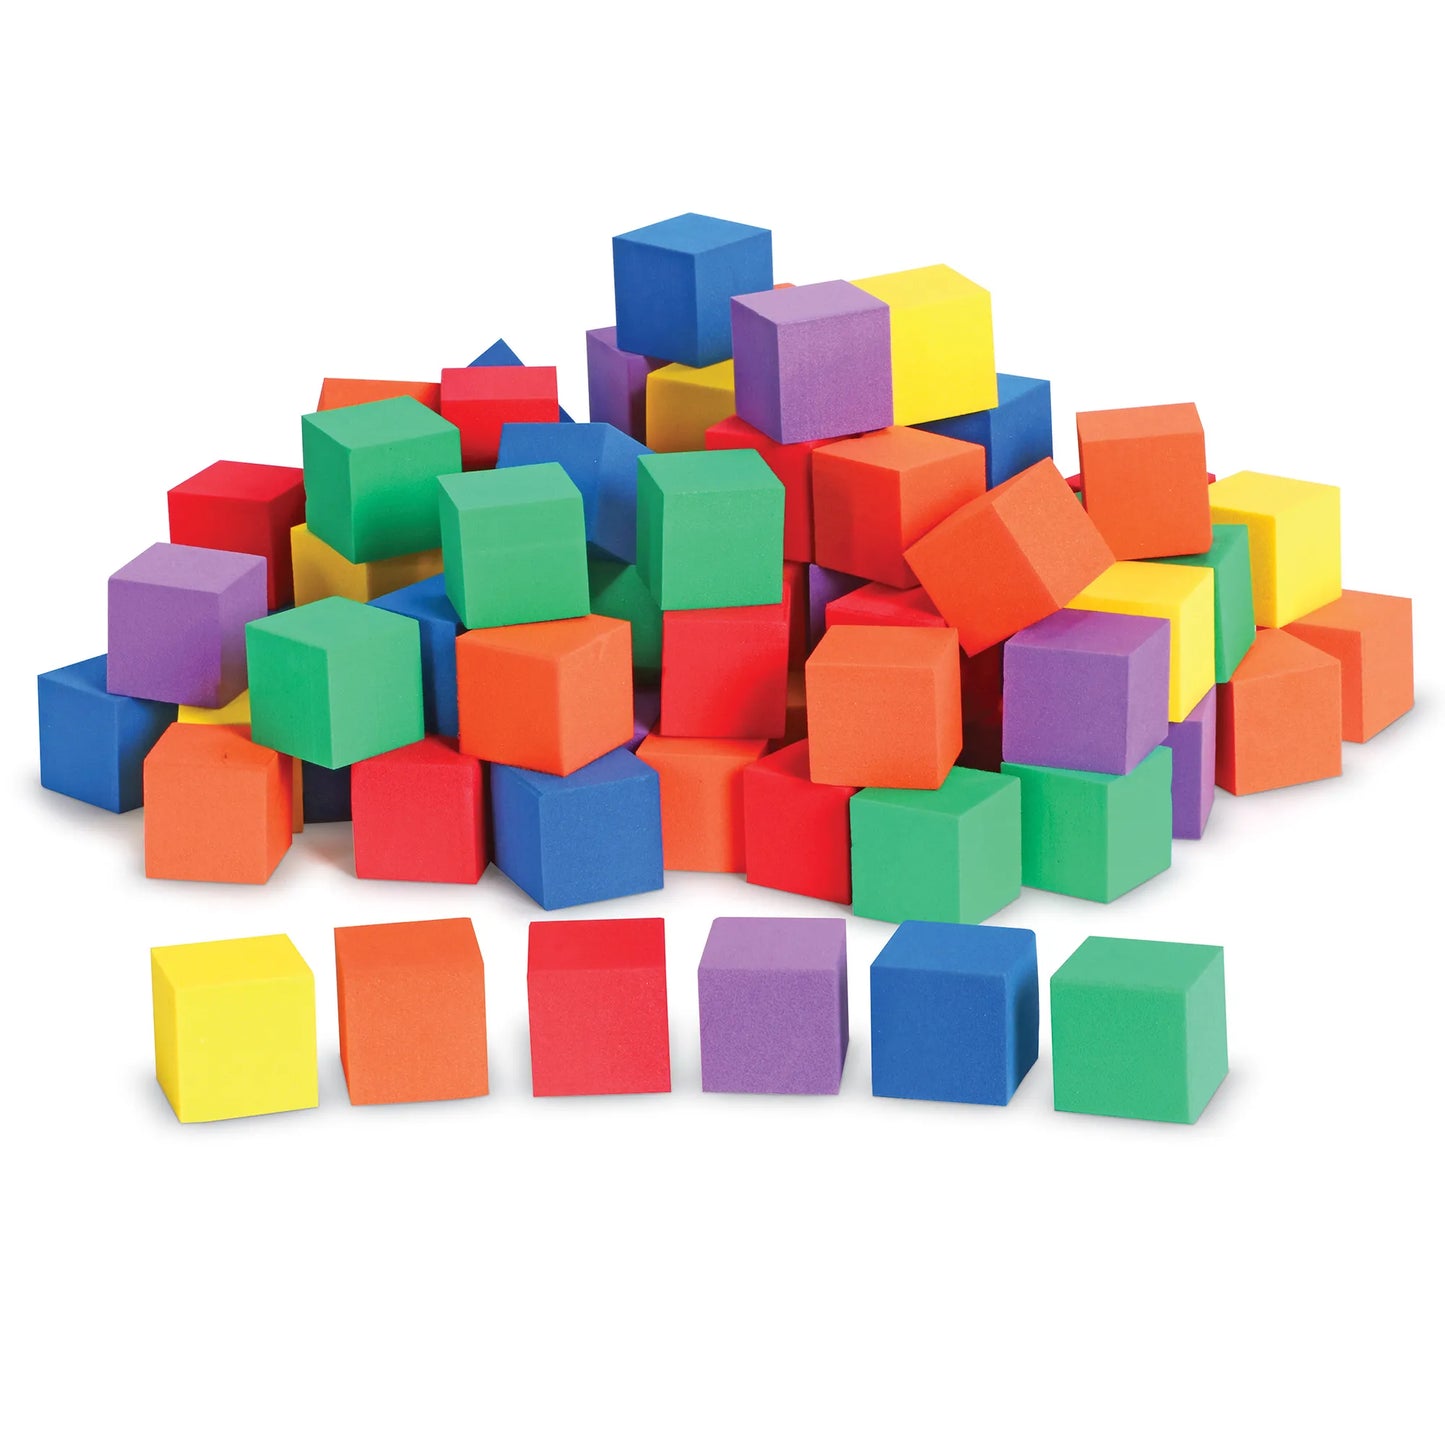 Learning Resources One-Inch Color Soft Cubes Set of 102